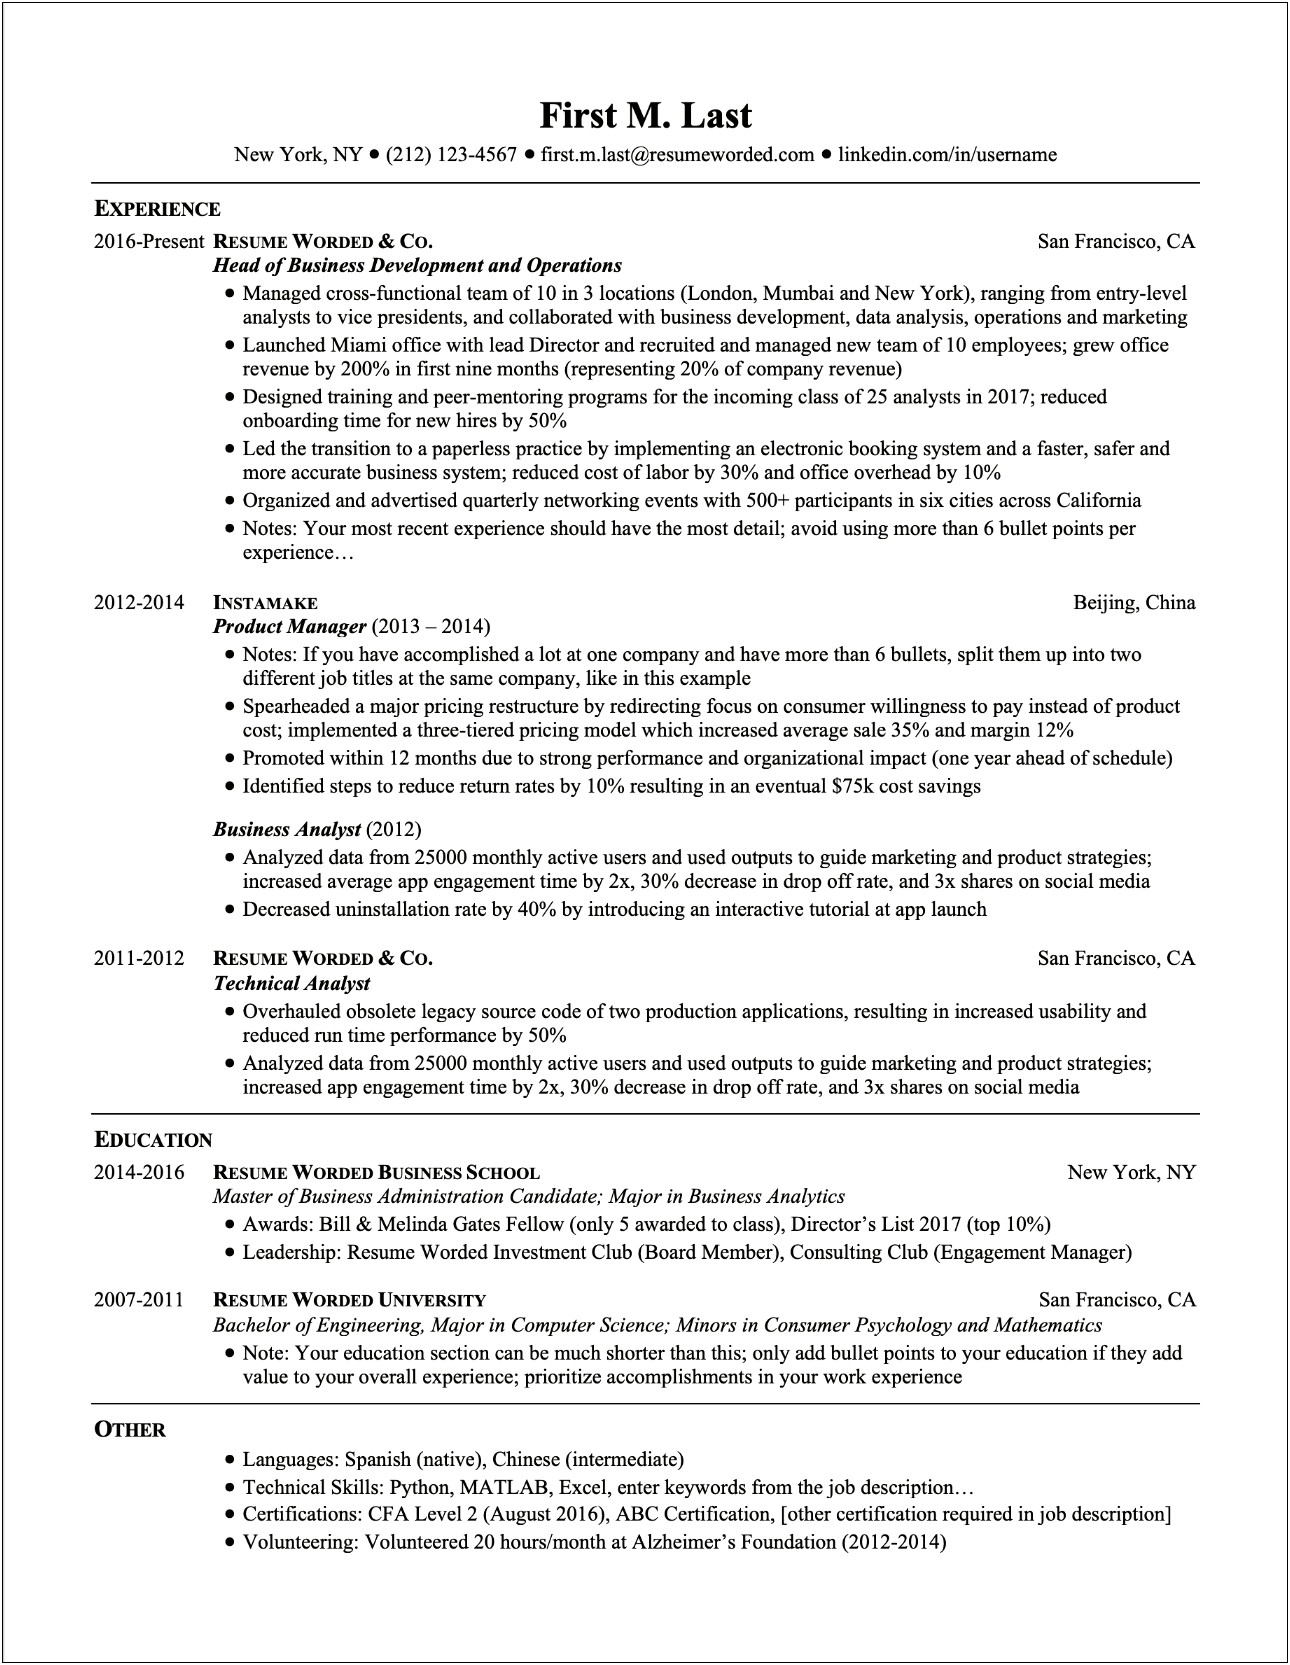 Sample Resume Multiple Roles One Company